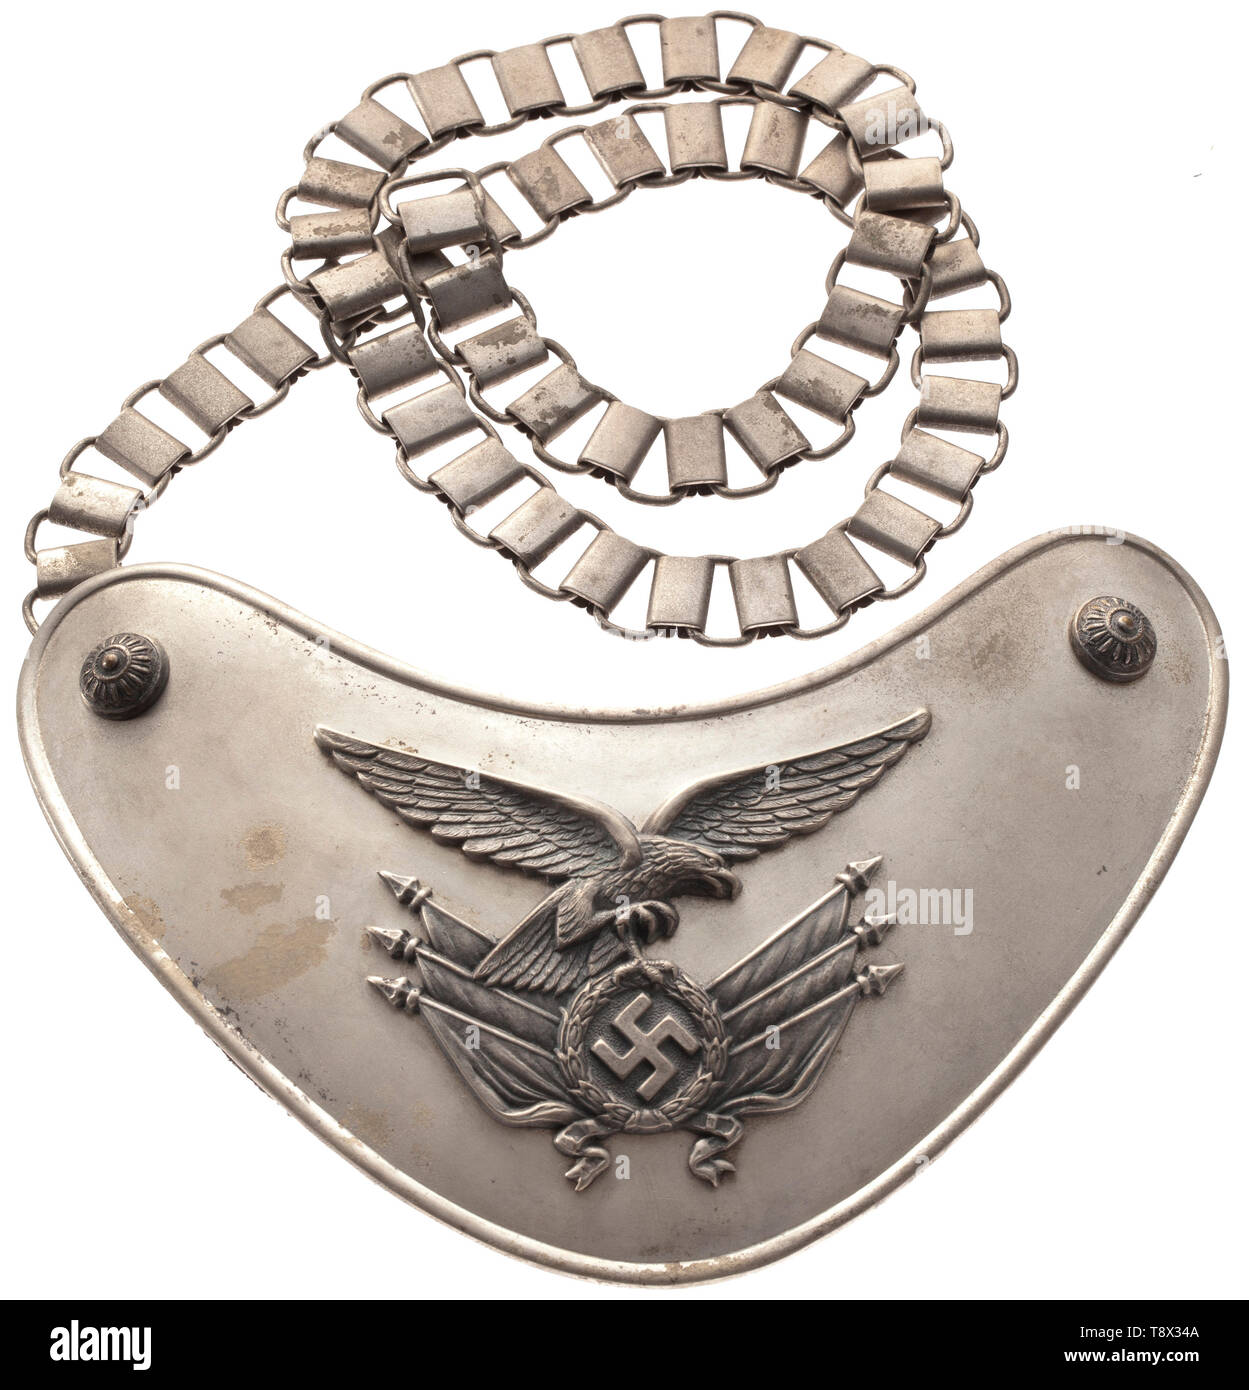 A gorget model 1936 for flag bearers of the Luftwaffe maker 'Juncker Berlin' Half moon-shaped, silvered shield, pin-affixed appliqués with old silver patina: 2nd model Luftwaffe eagle on a bundle of flags and corner rosettes. Liner of Luftwaffe cloth (mothy), the arresting clasp punched 'C.E. Juncker Berlin'. Silvered chain. Very rare. historic, historical, 20th century, Editorial-Use-Only Stock Photo